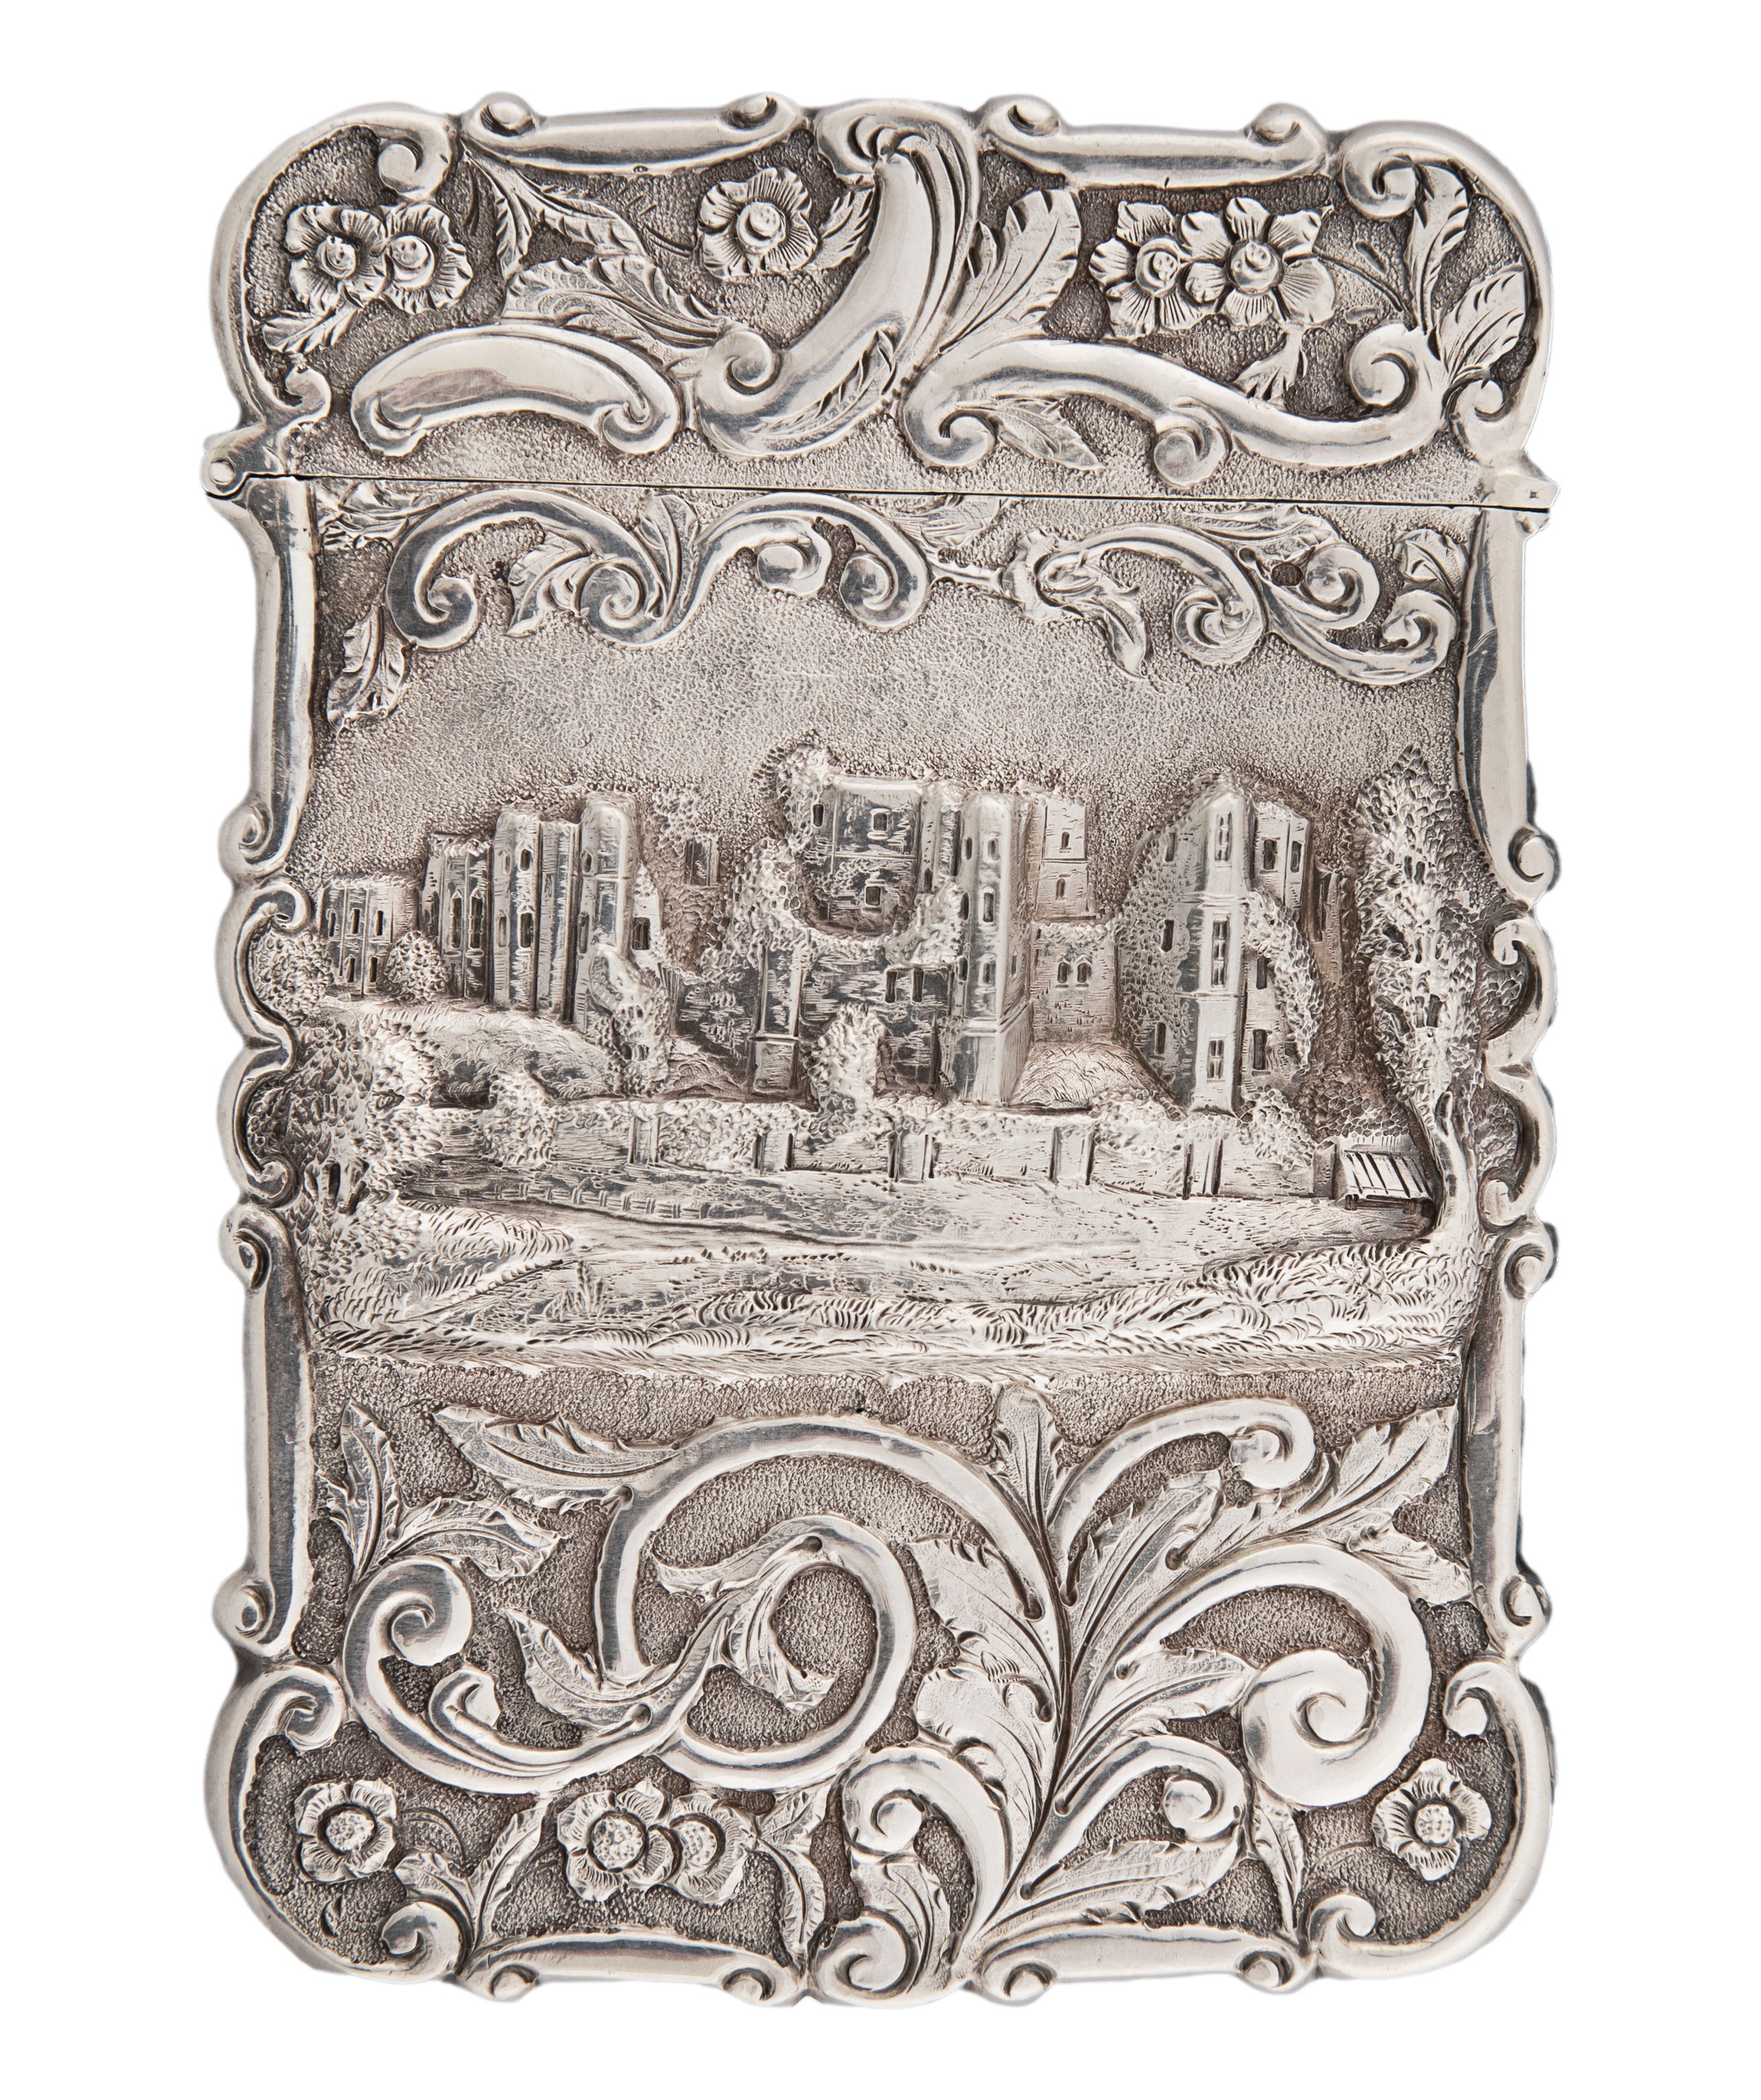 Birmingham, Late 18th/Early 19th Century, A silver embossed card case depicting Kenilworth Castle - Image 2 of 3